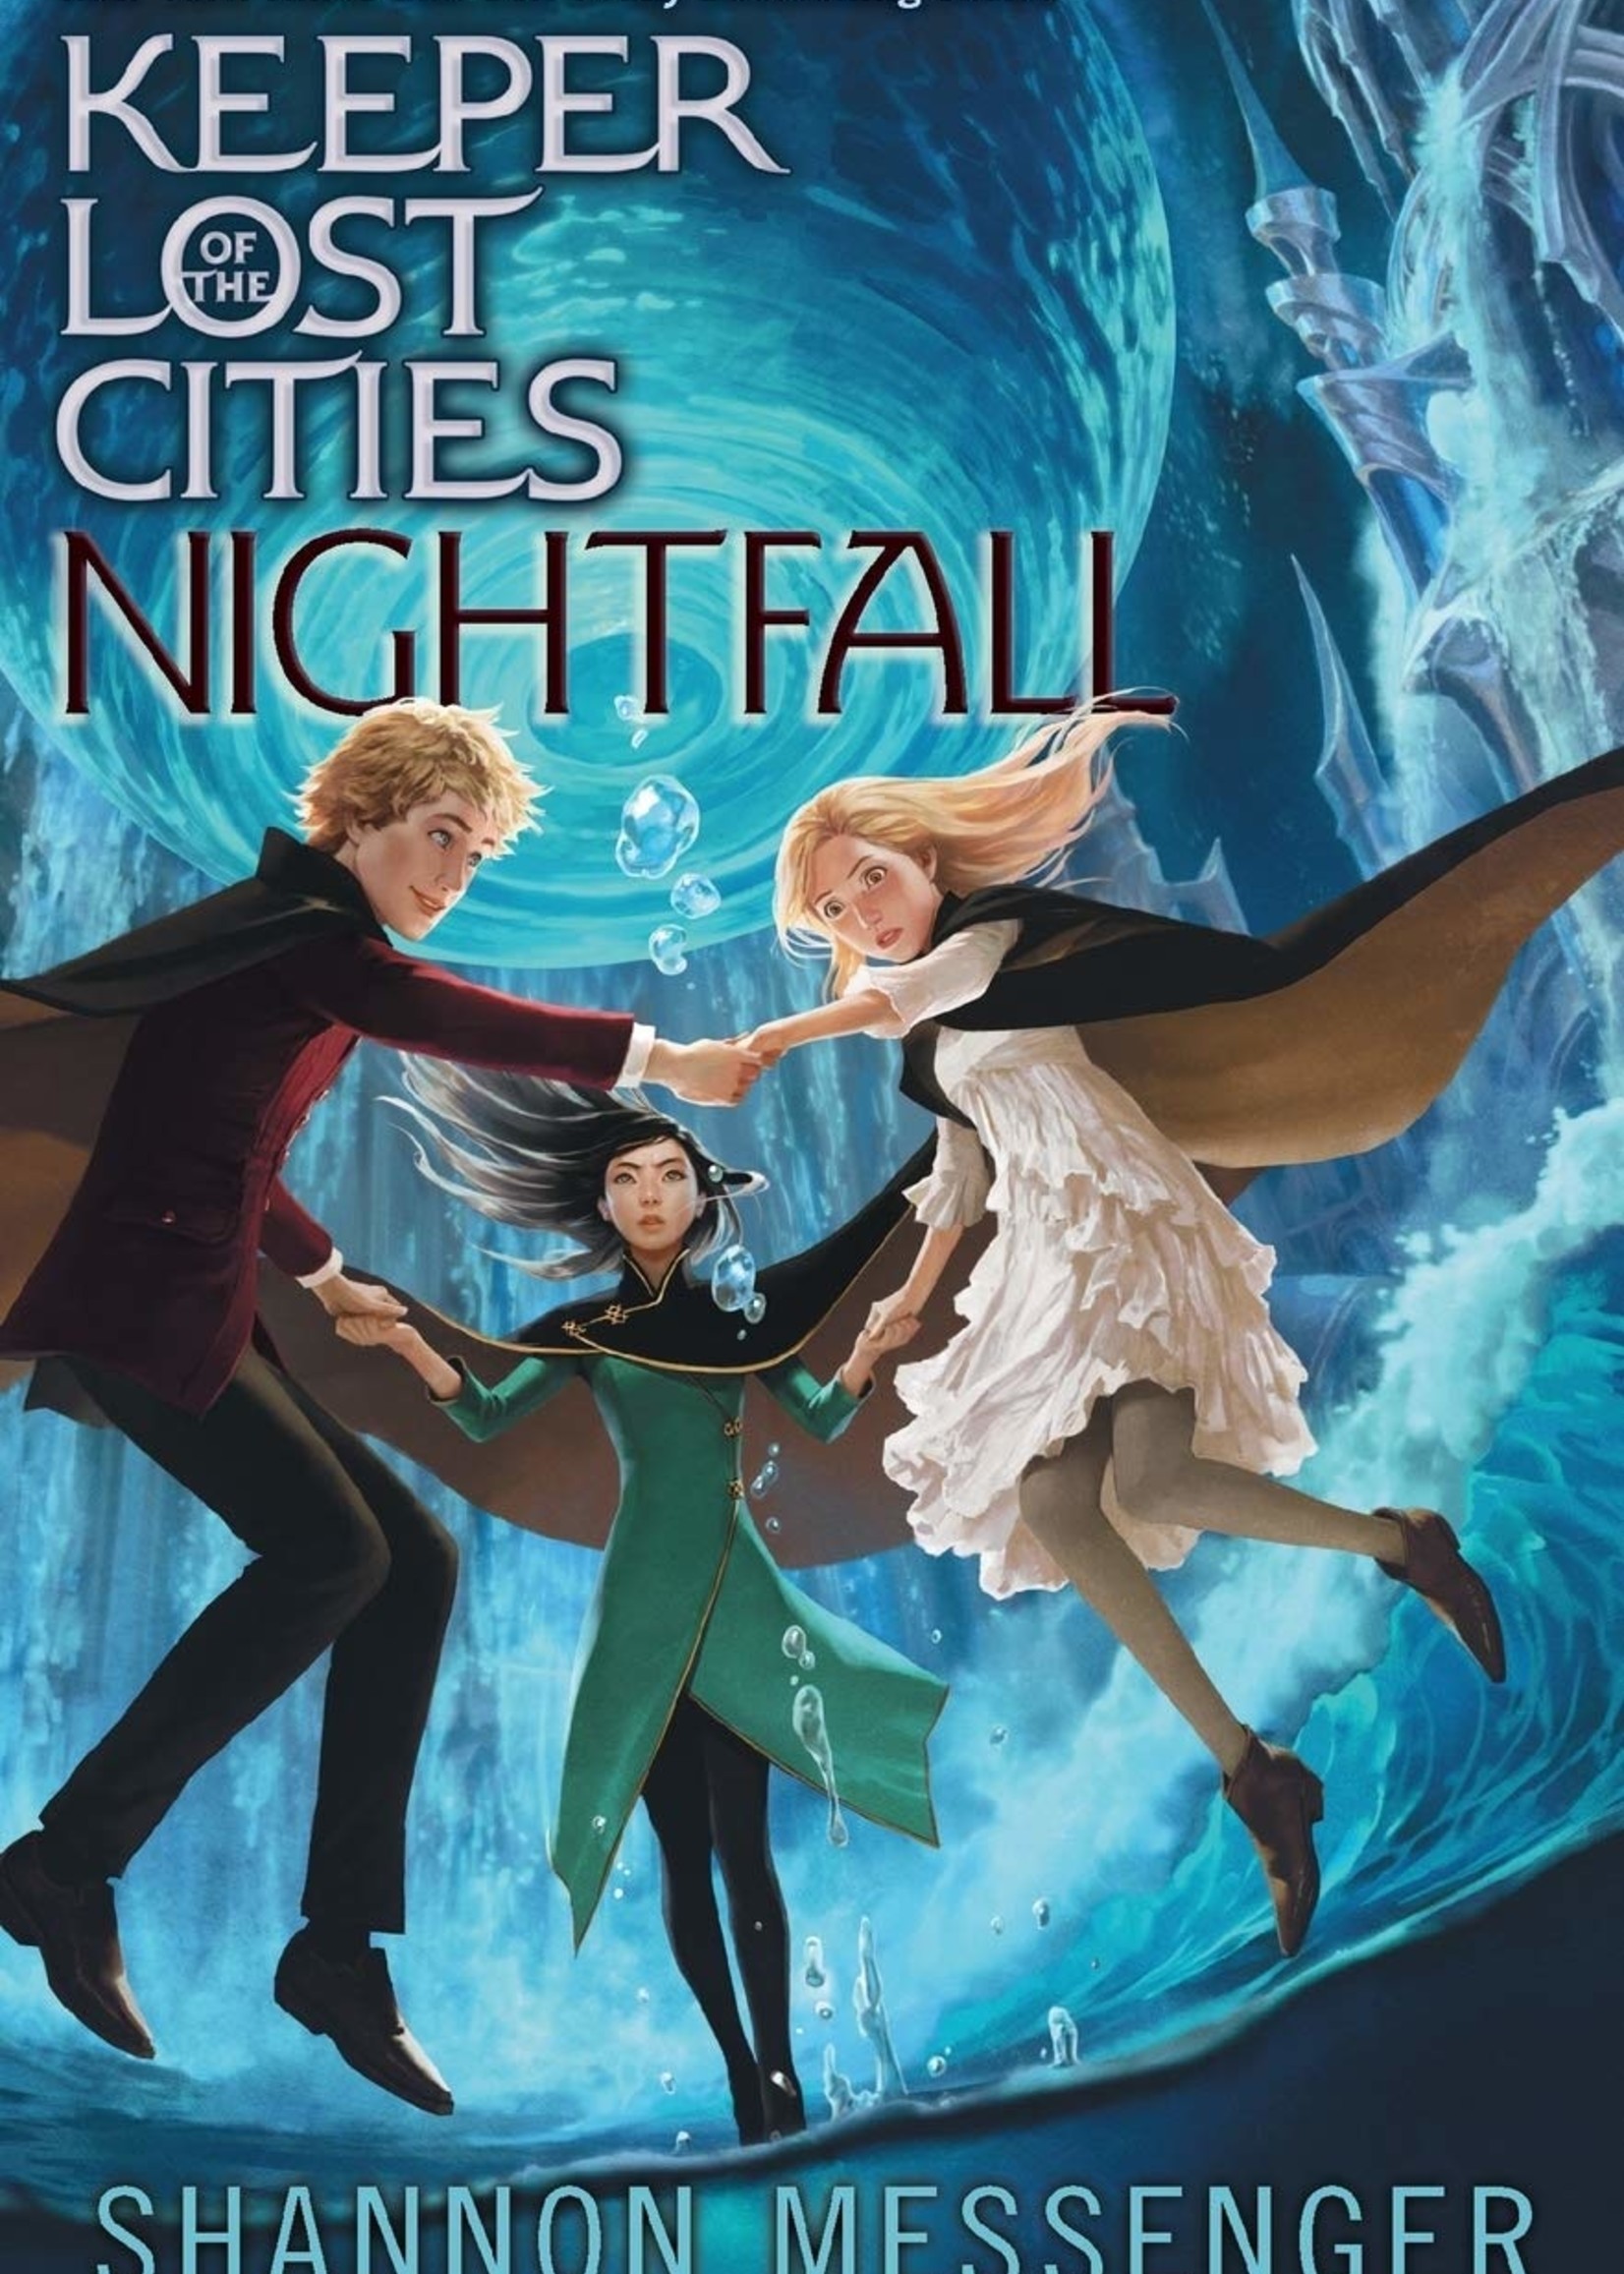 Keeper of the Lost Cities #06, Nightfall - Paperback